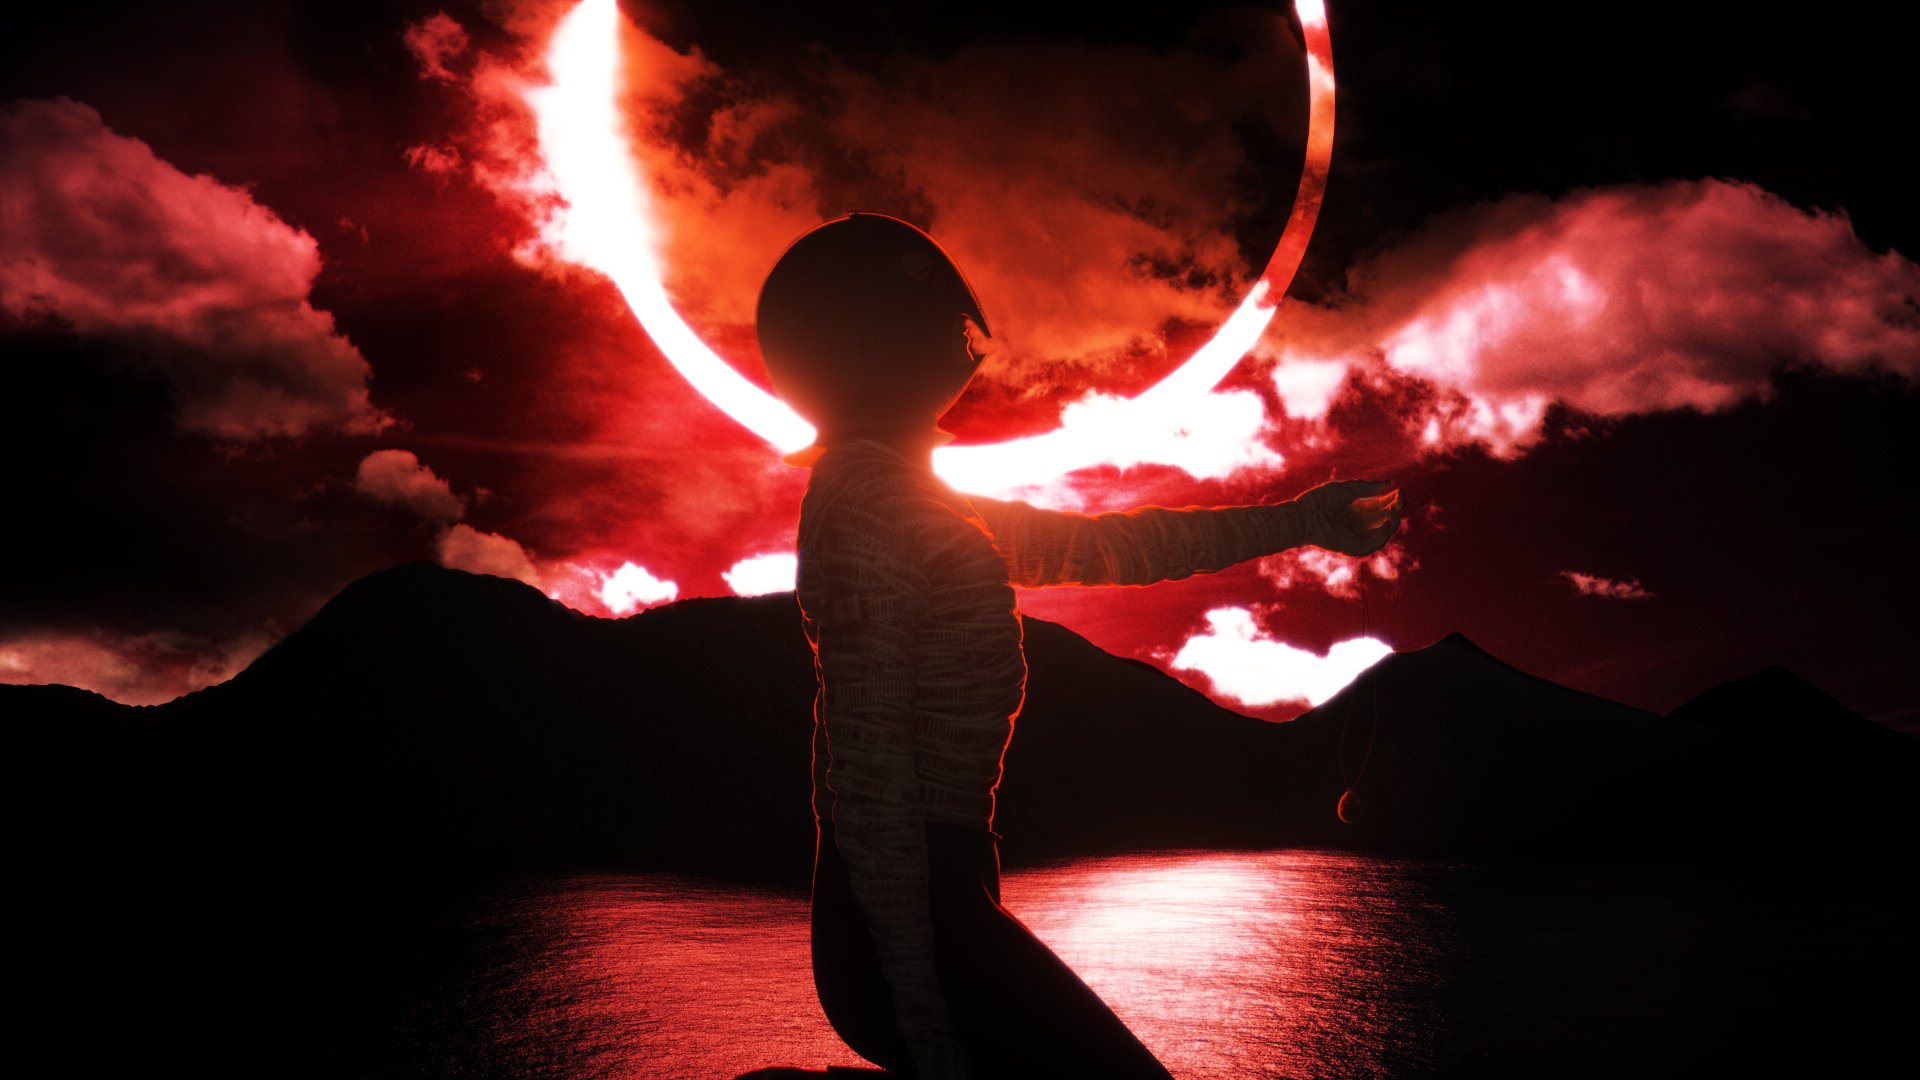 3D recreation of the start of the Eclipse I did in early 2017: Berserk.